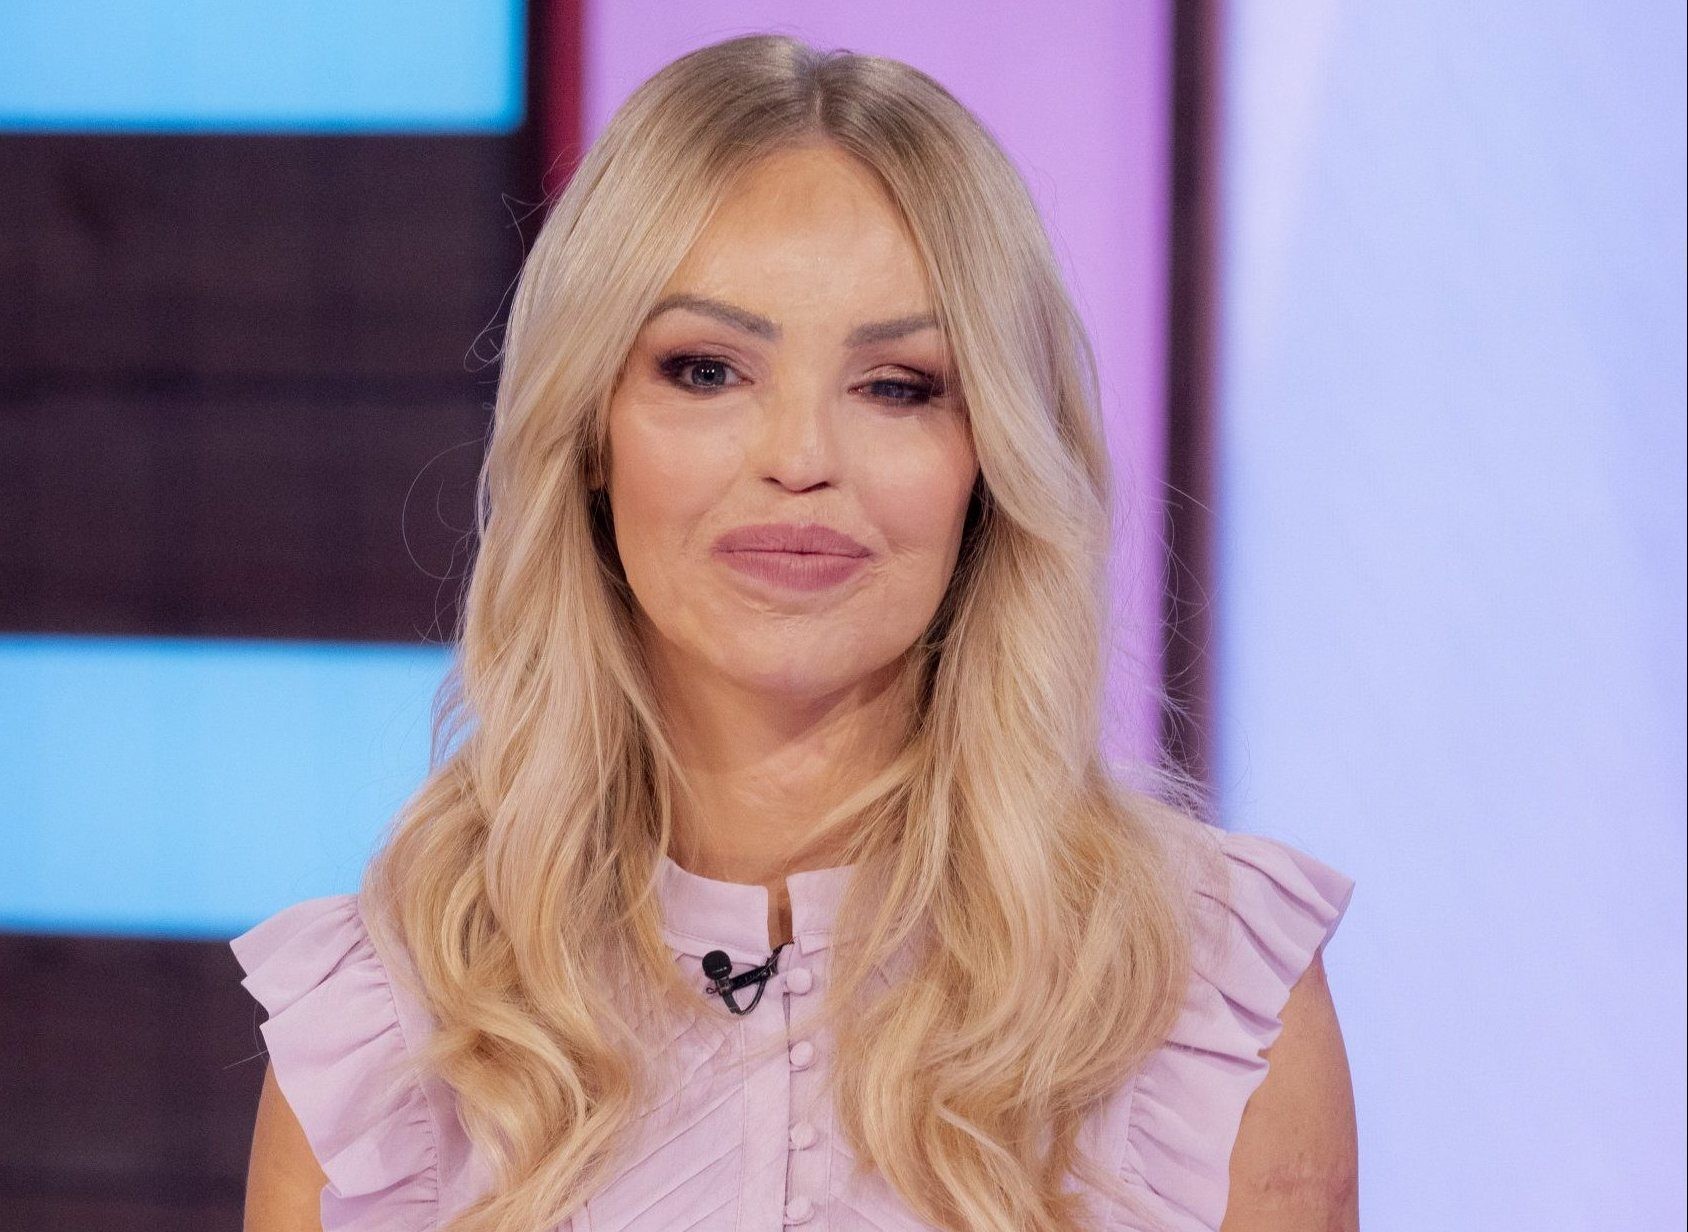 Katie Piper shares powerful message as she hits back at troll who claims she has ‘designer face’